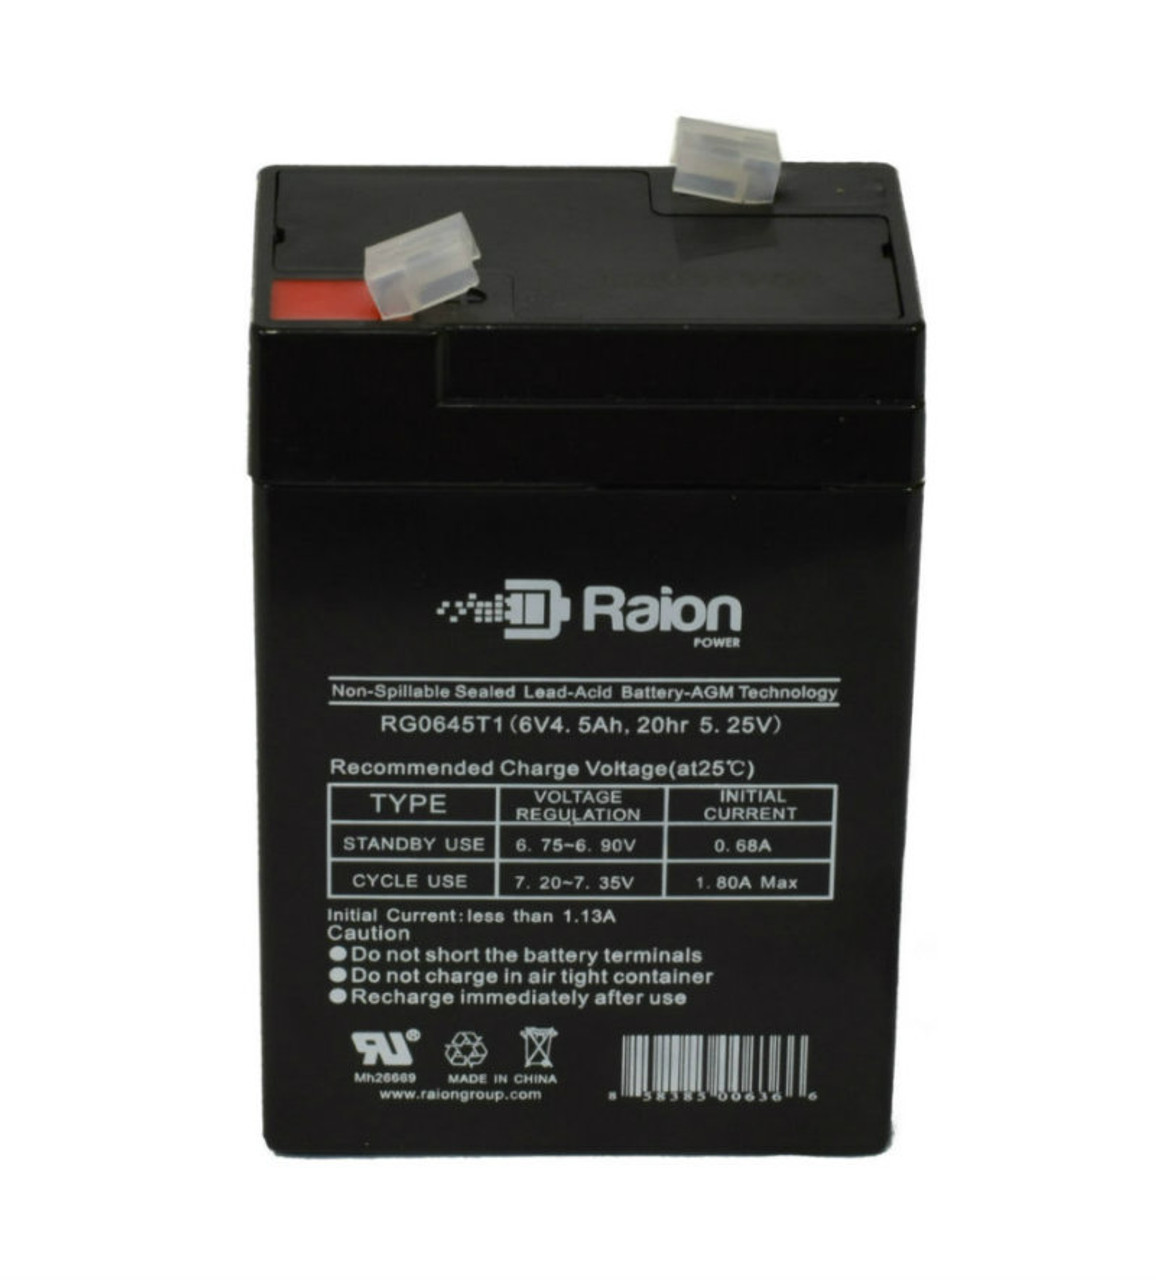 Raion Power RG0645T1 Replacement Battery Cartridge for Peg Perego ED1028 6V Traffic Police XL